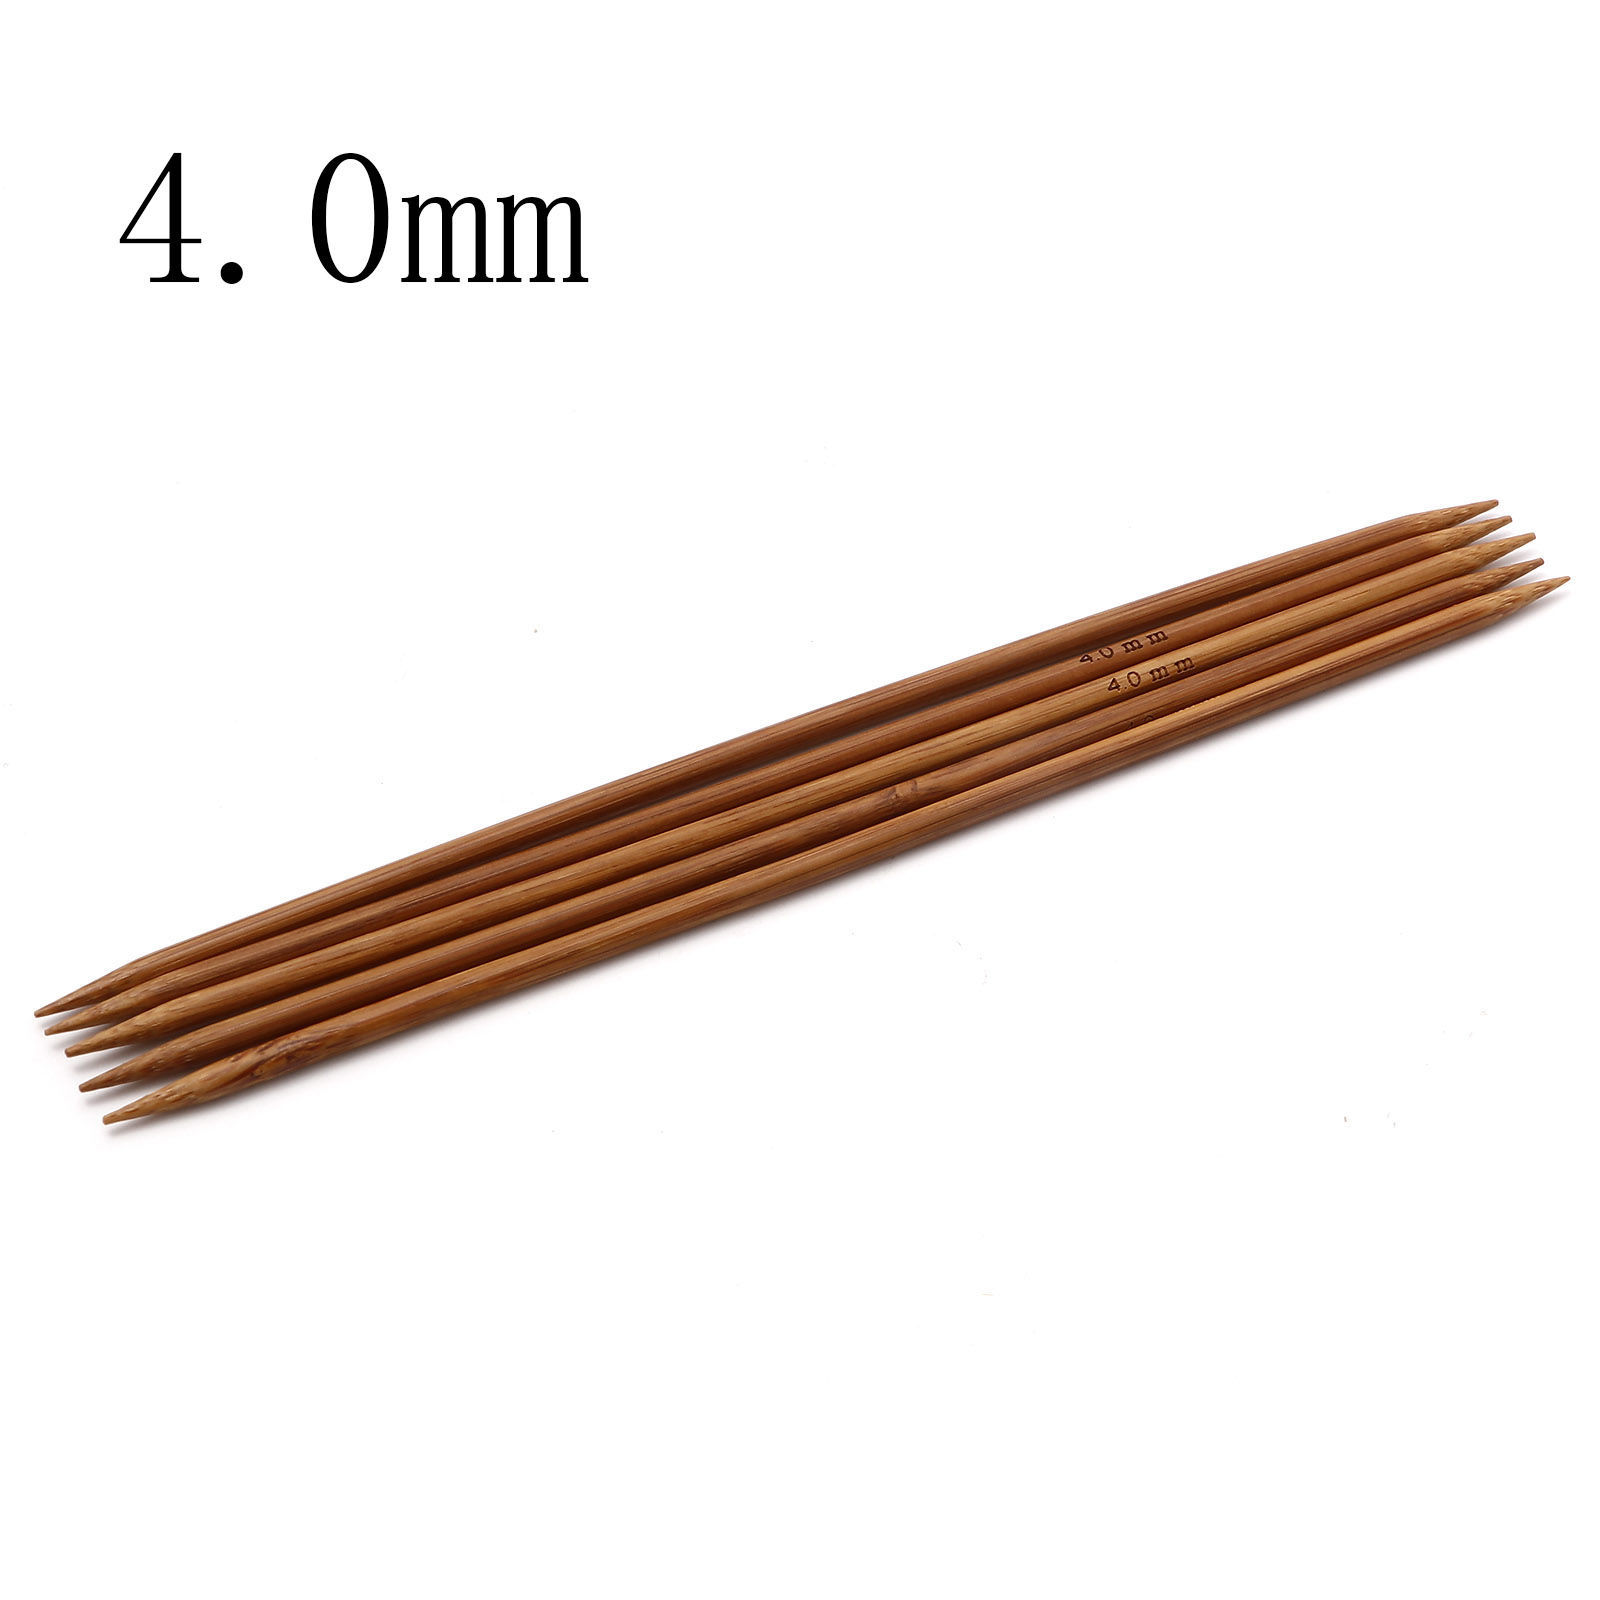 Picture of (US6 4.0mm) Bamboo Double Pointed Knitting Needles Brown 20cm(7 7/8") long, 5 PCs